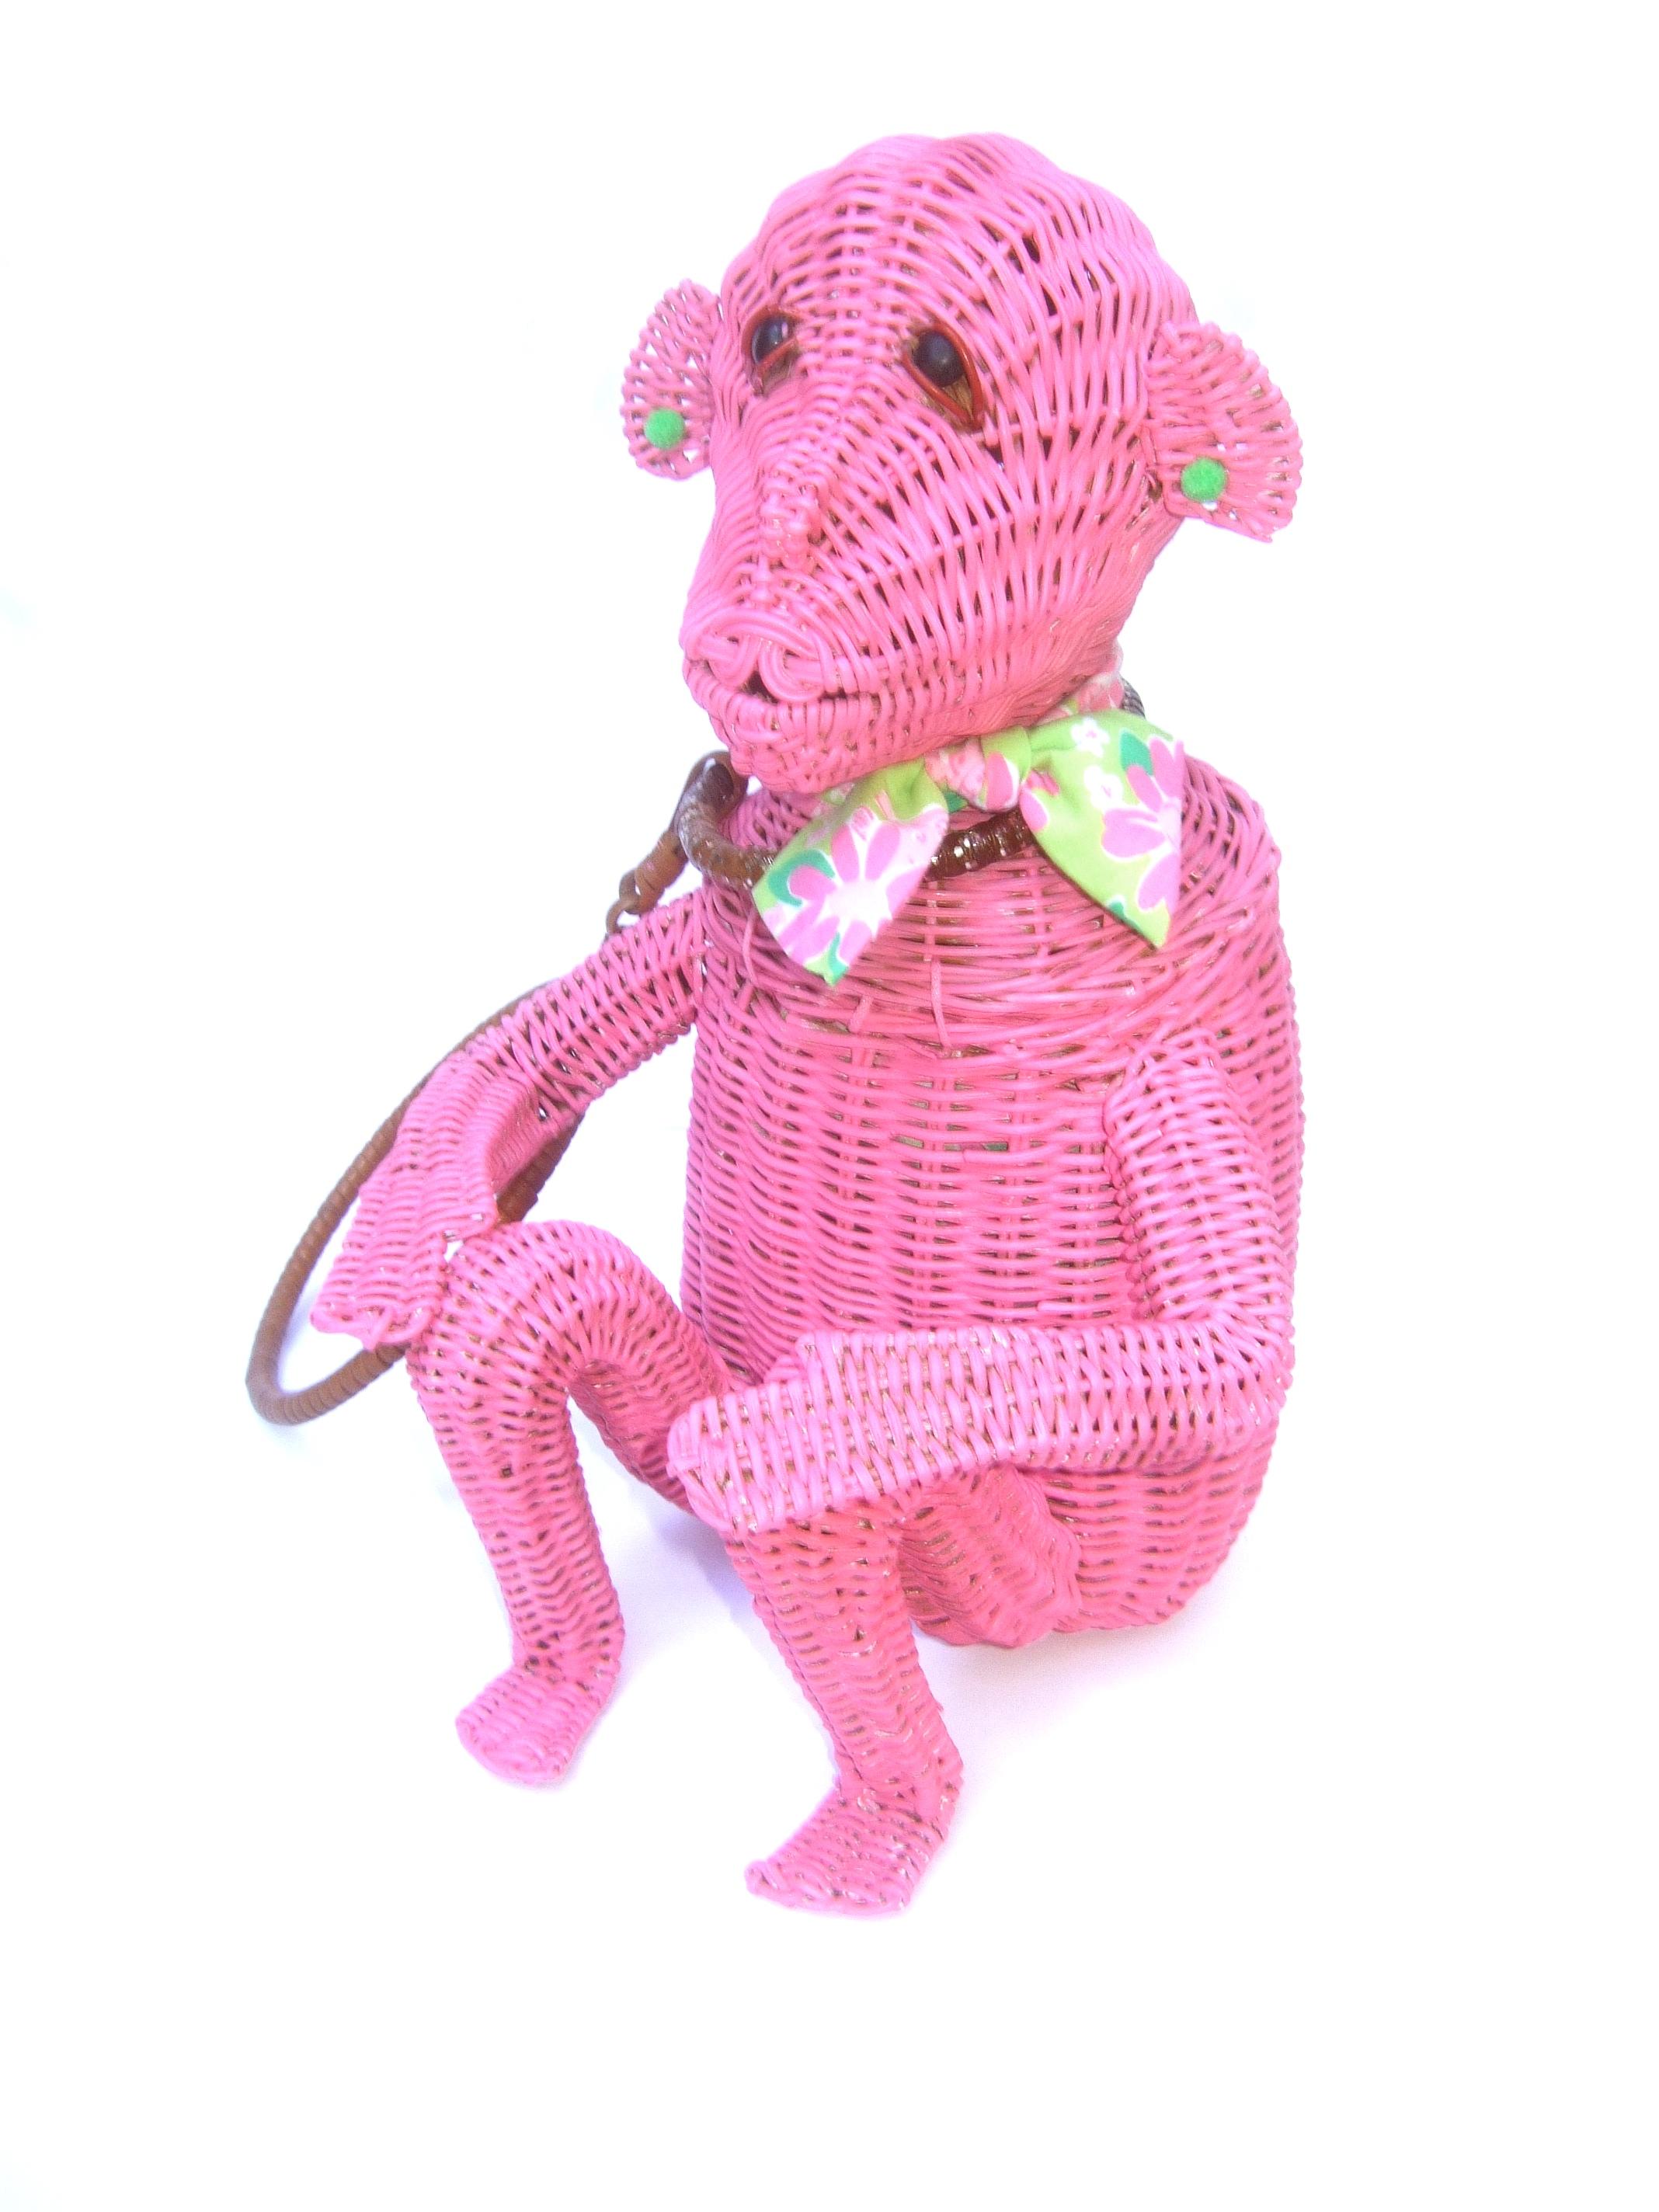 Whimsical Vintage Wicker Monkey Handbag With Lilly Pulitzer Fabric c 1950's  3